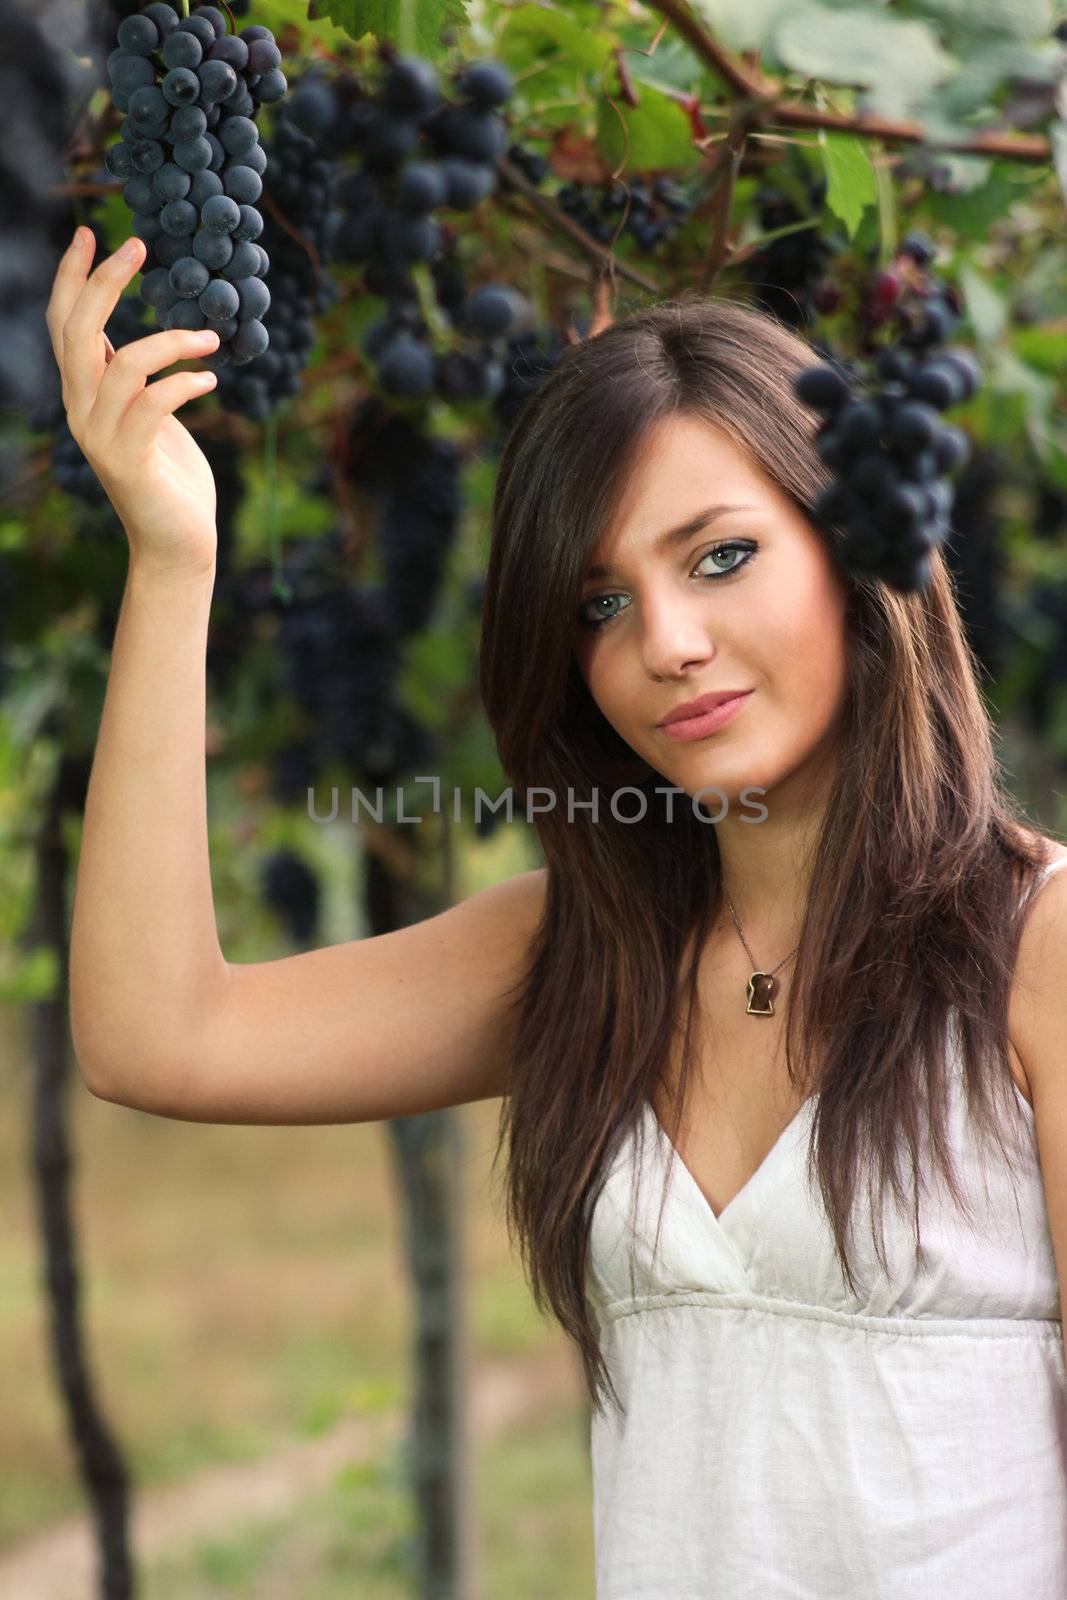 Beautiful young girl in a grapevine picking fruits